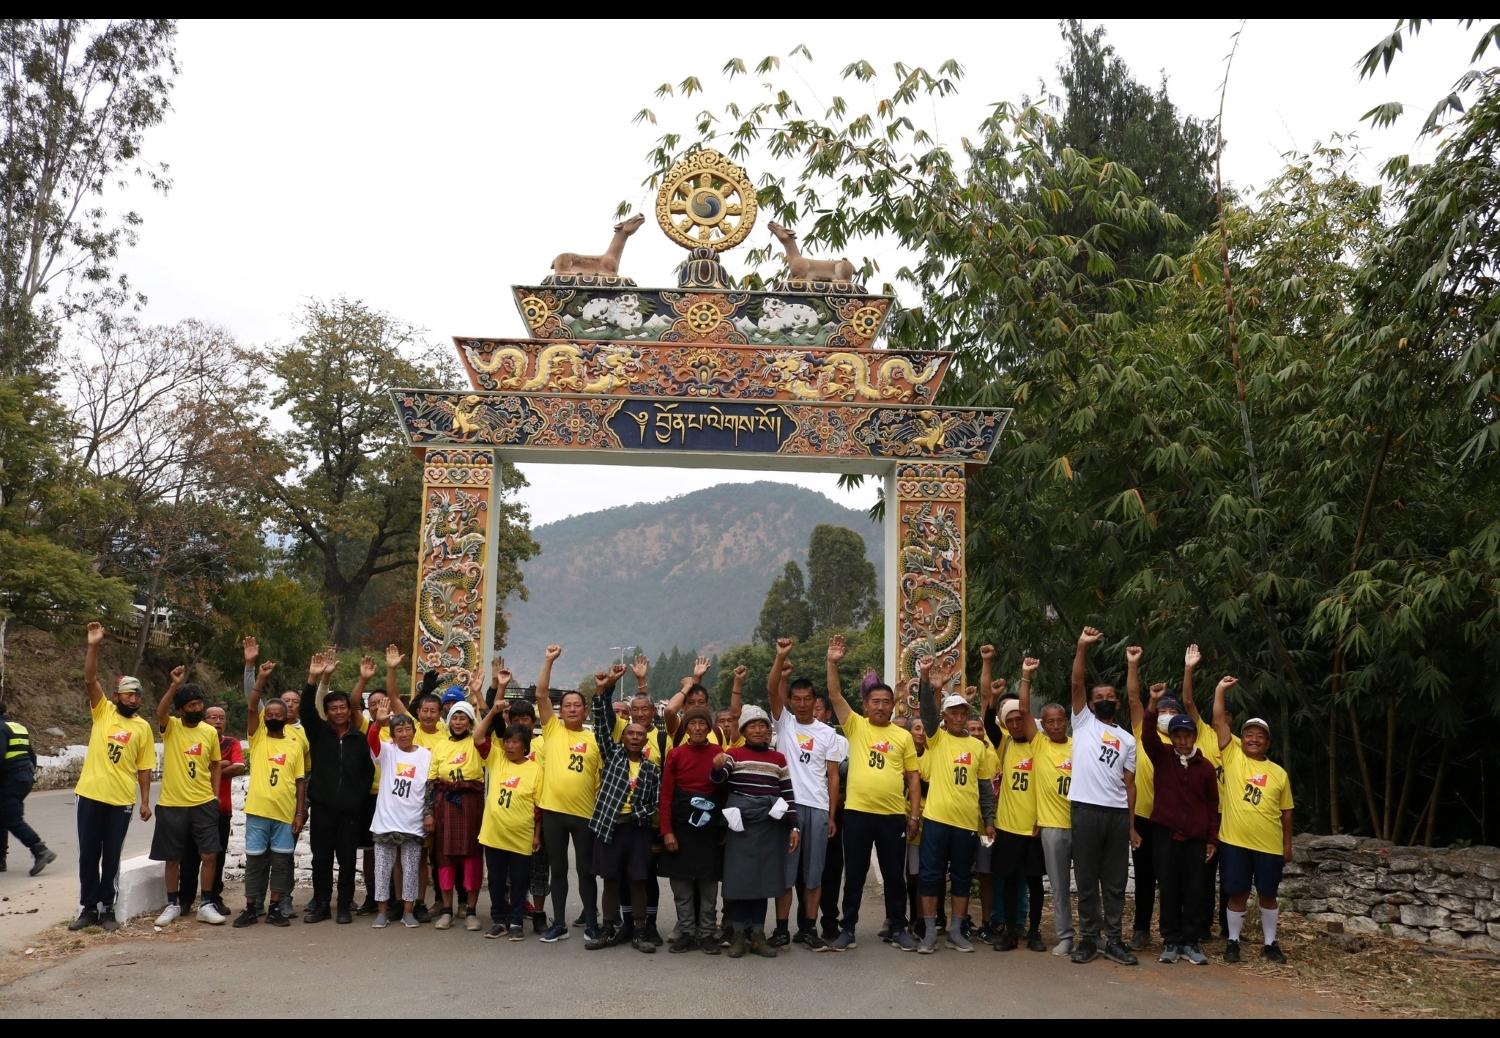 The Dzongkhag Administration organized the marathon today as a build up program for the 116th National Day celebration.